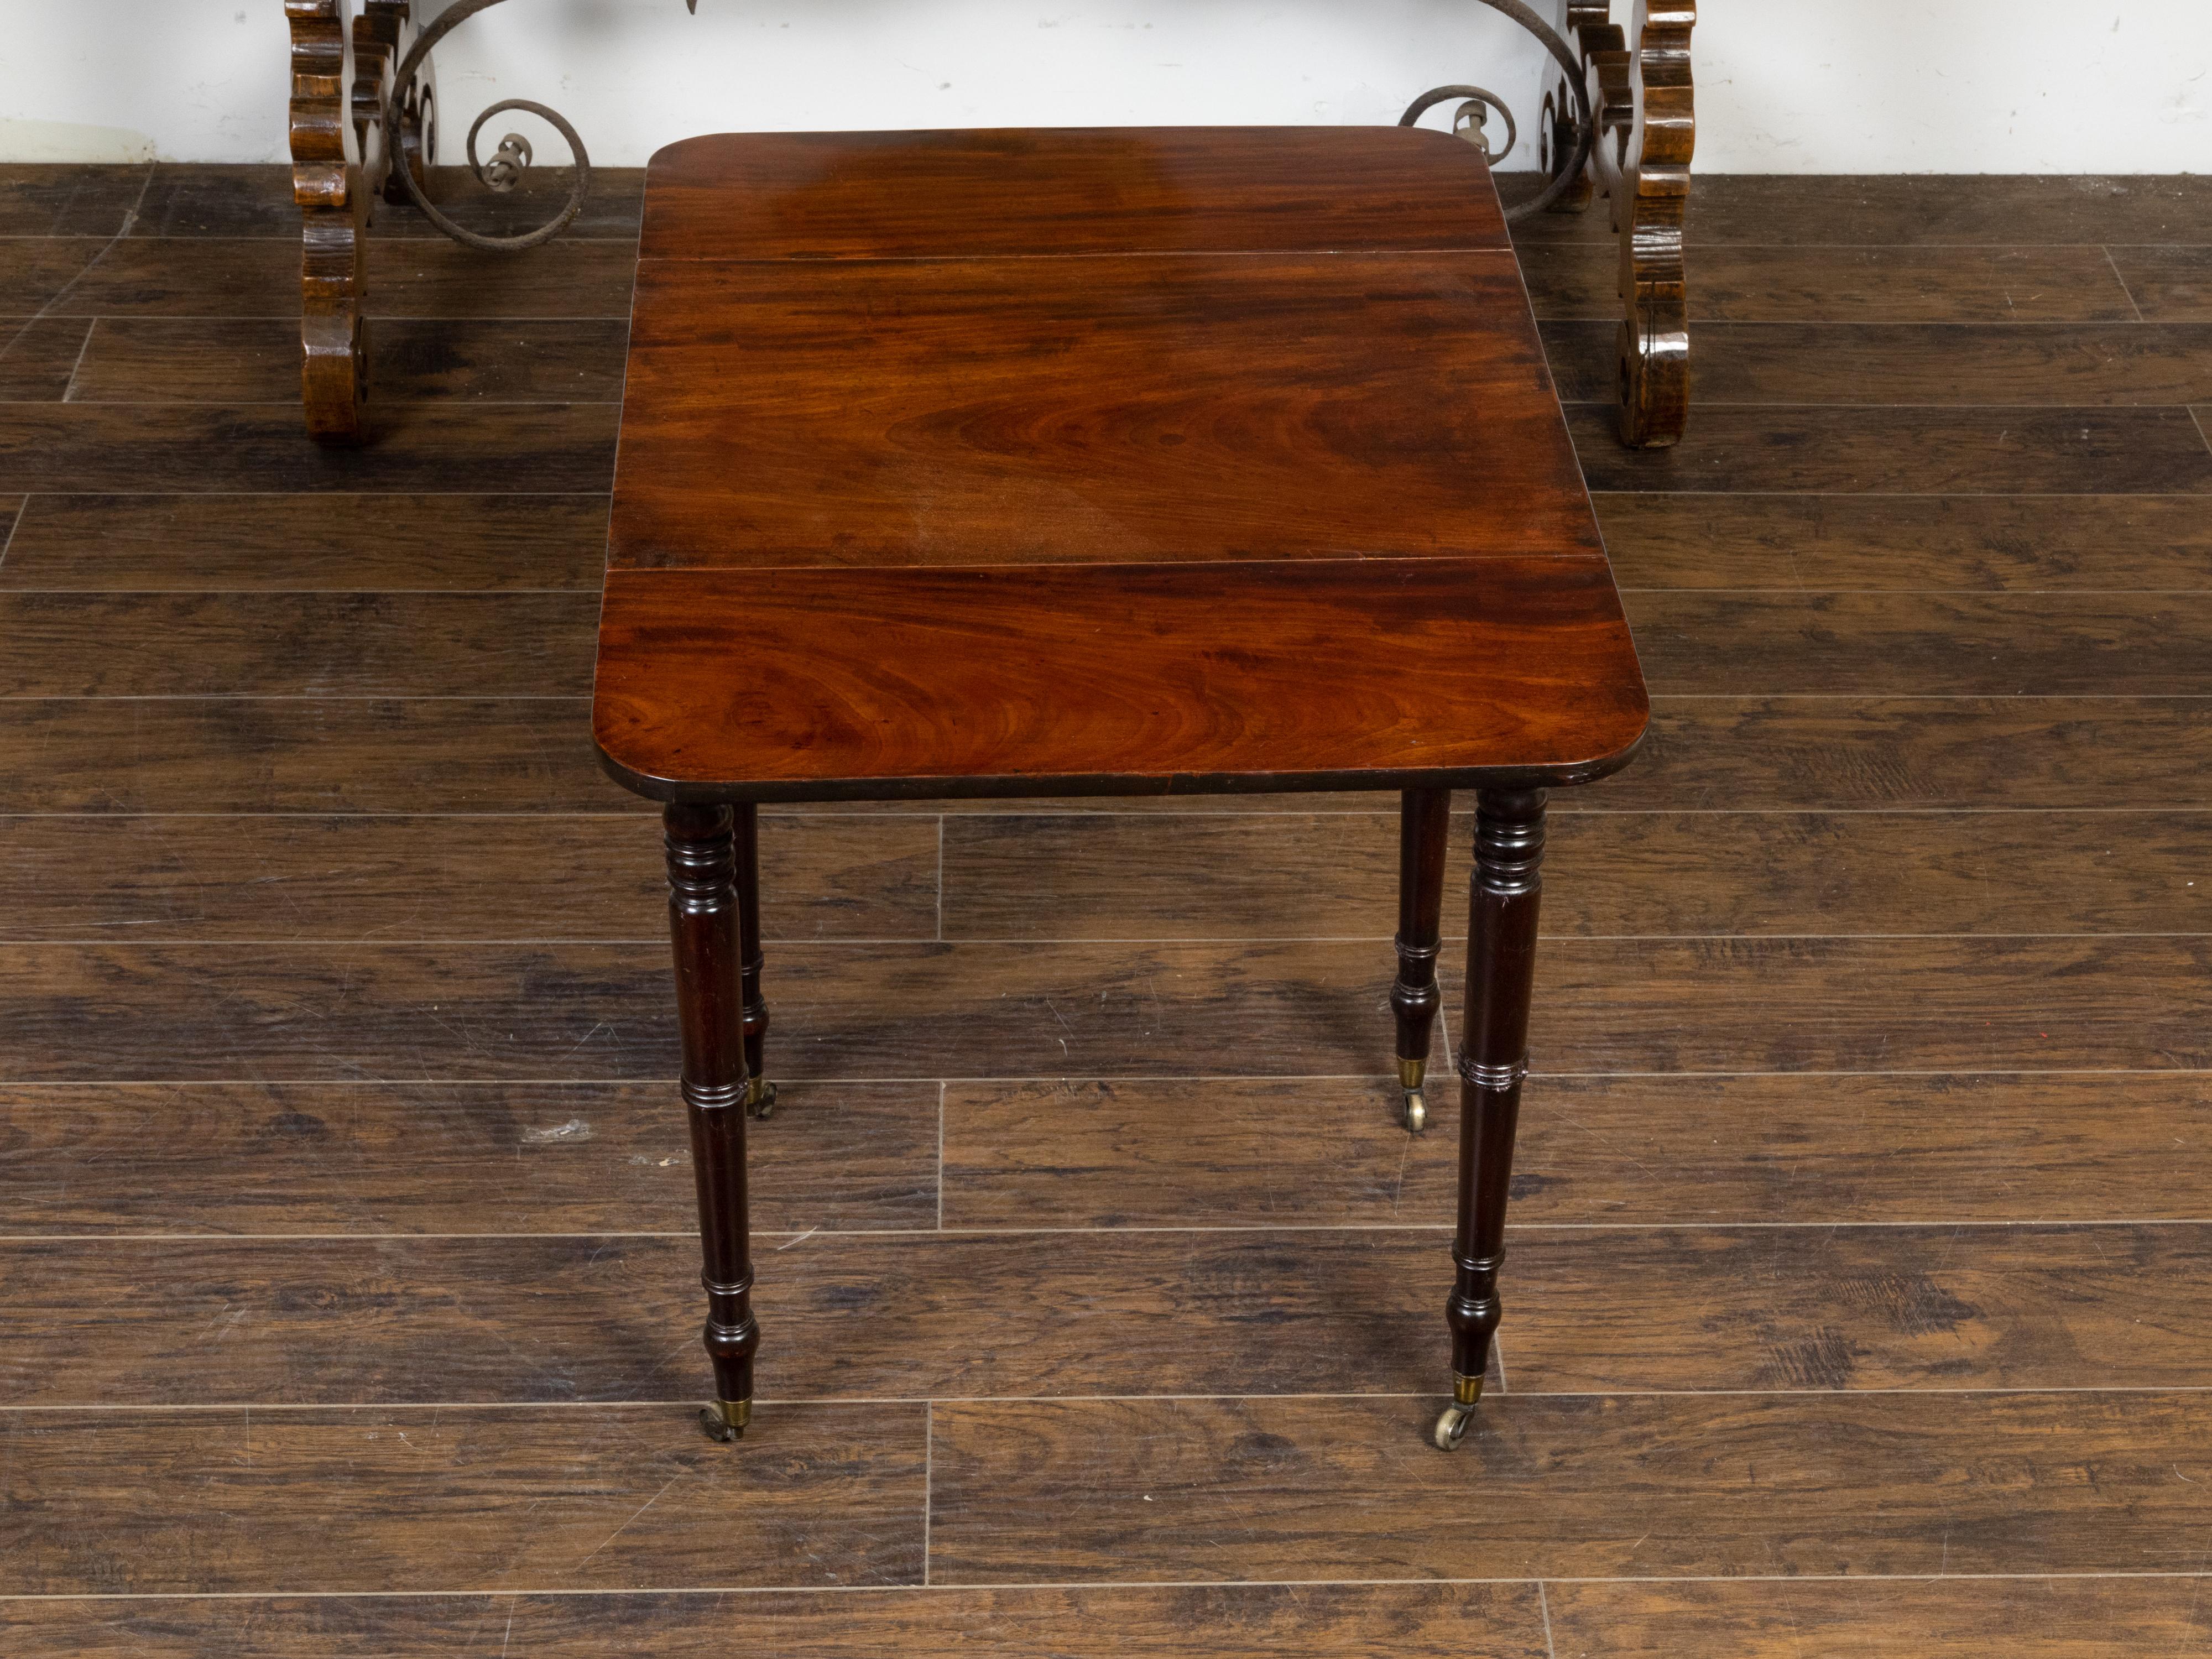 English 1820s Regency Period Mahogany Pembroke Table with Drawer and Turned Legs 3